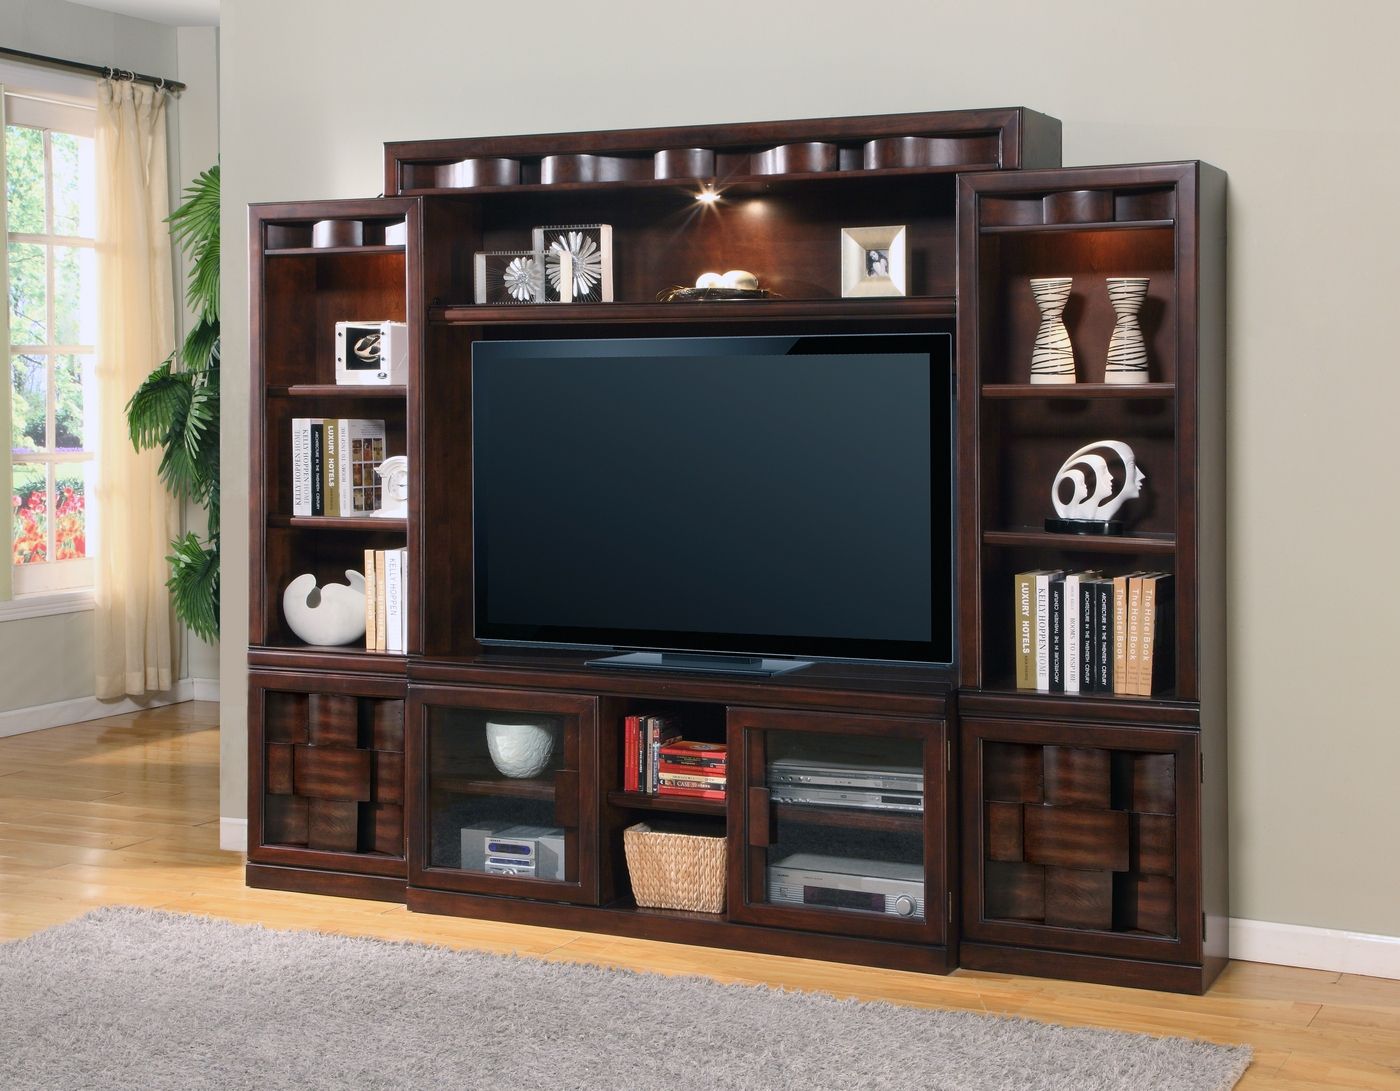 Oslo Contemporary 60" Entertainment Wall Unit With Intended For Modern Tv Entertainment Centers (View 10 of 15)